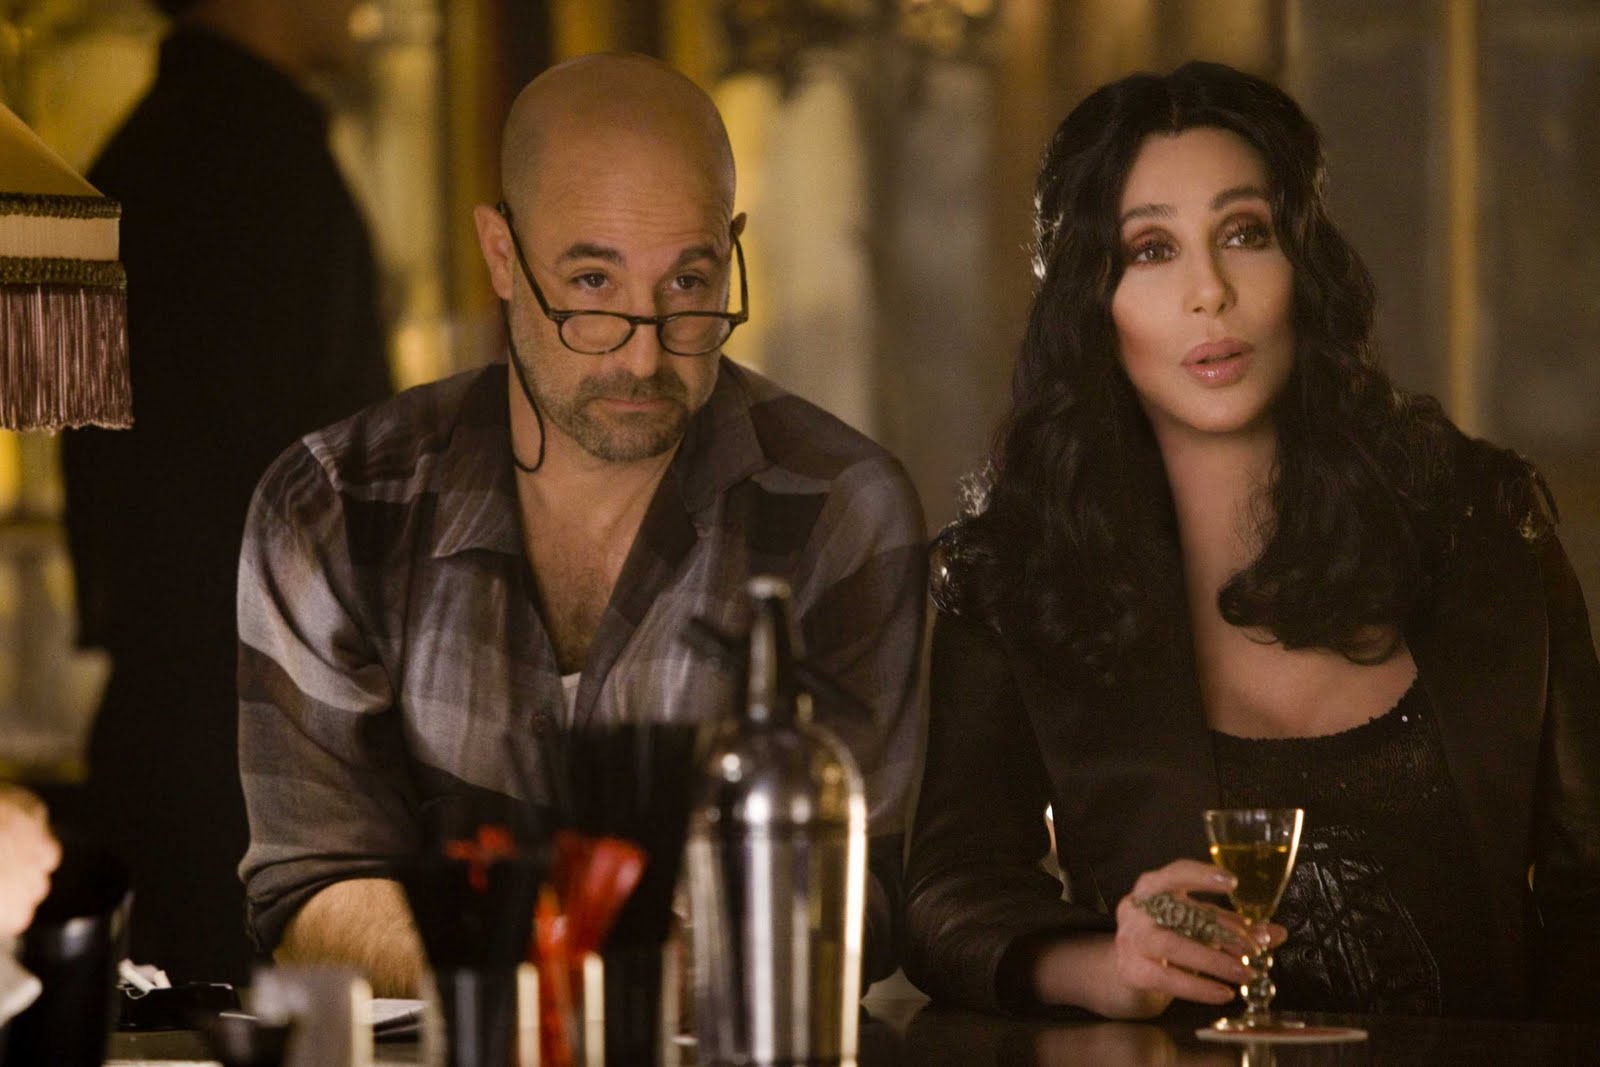 [Stanley%2520Tucci%2520and%2520Cher%2520in%2520Burlesque%255B4%255D.jpg]